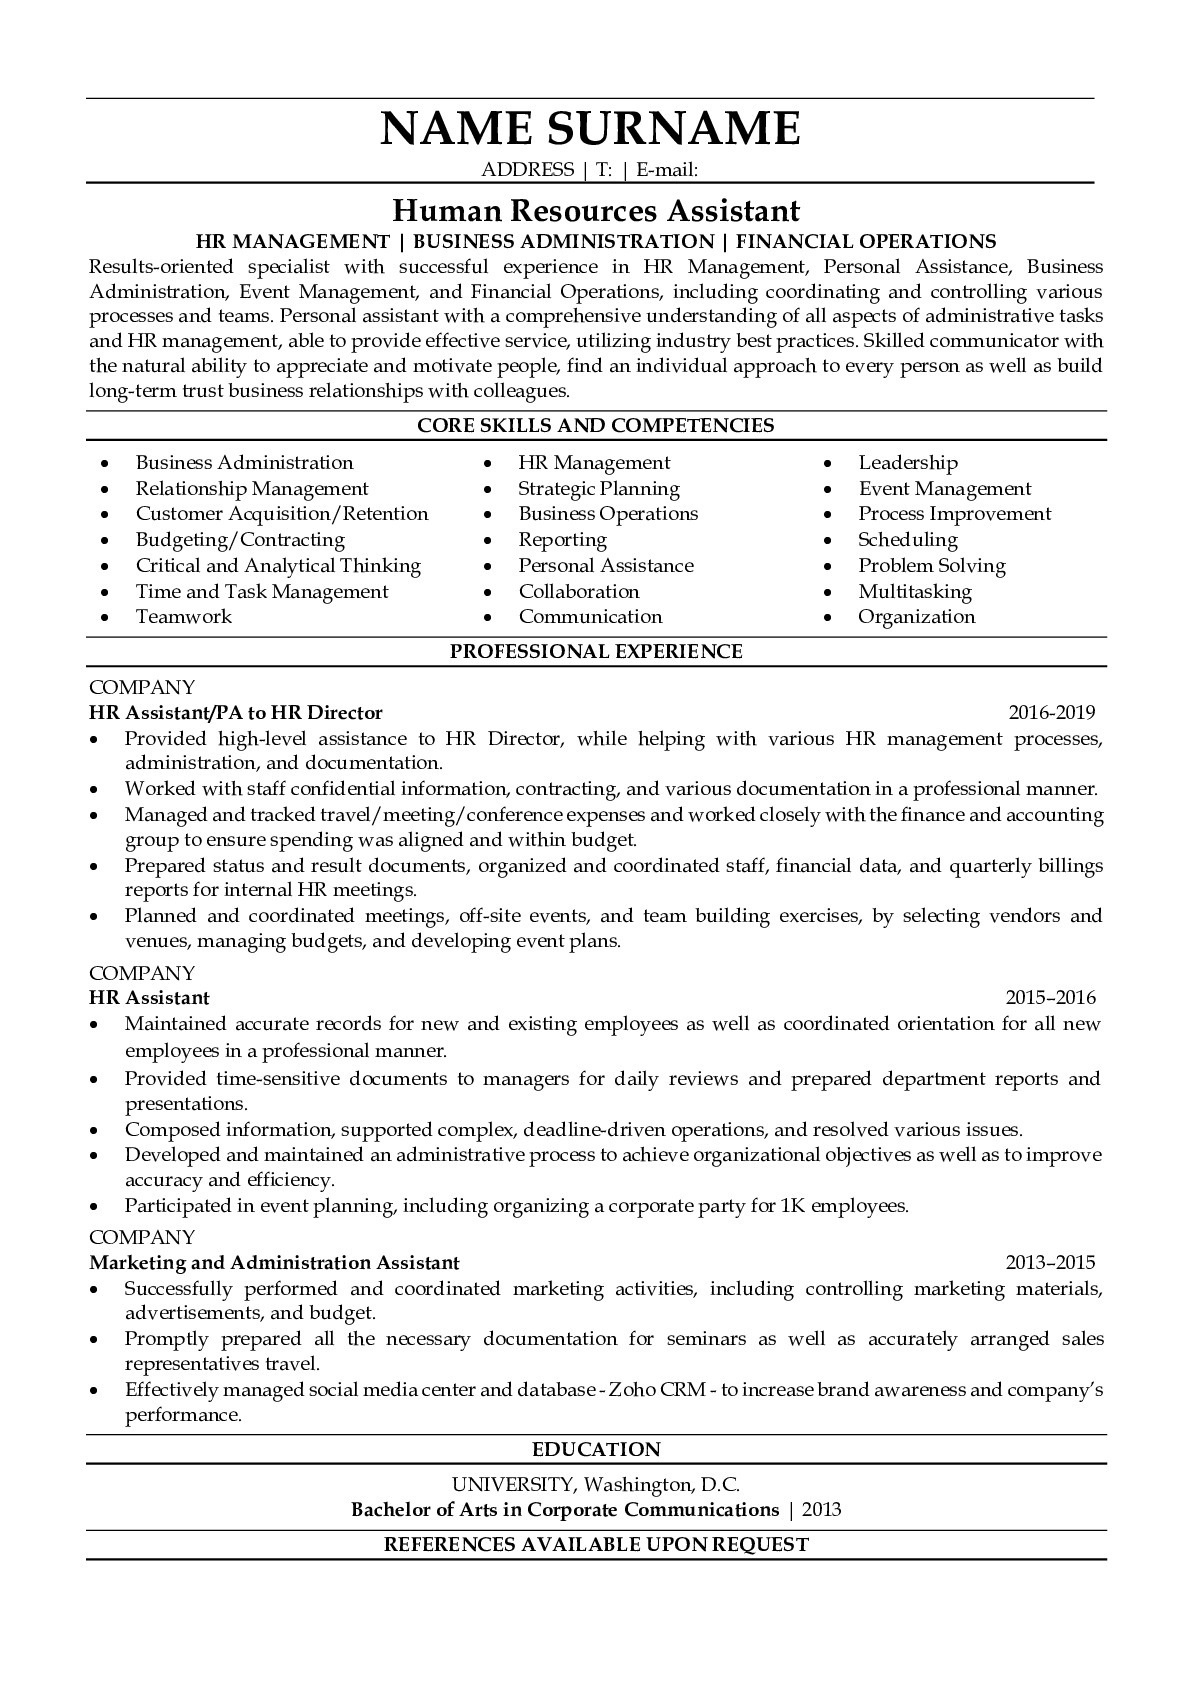 Human Resources (HR) Assistant Resume Sample